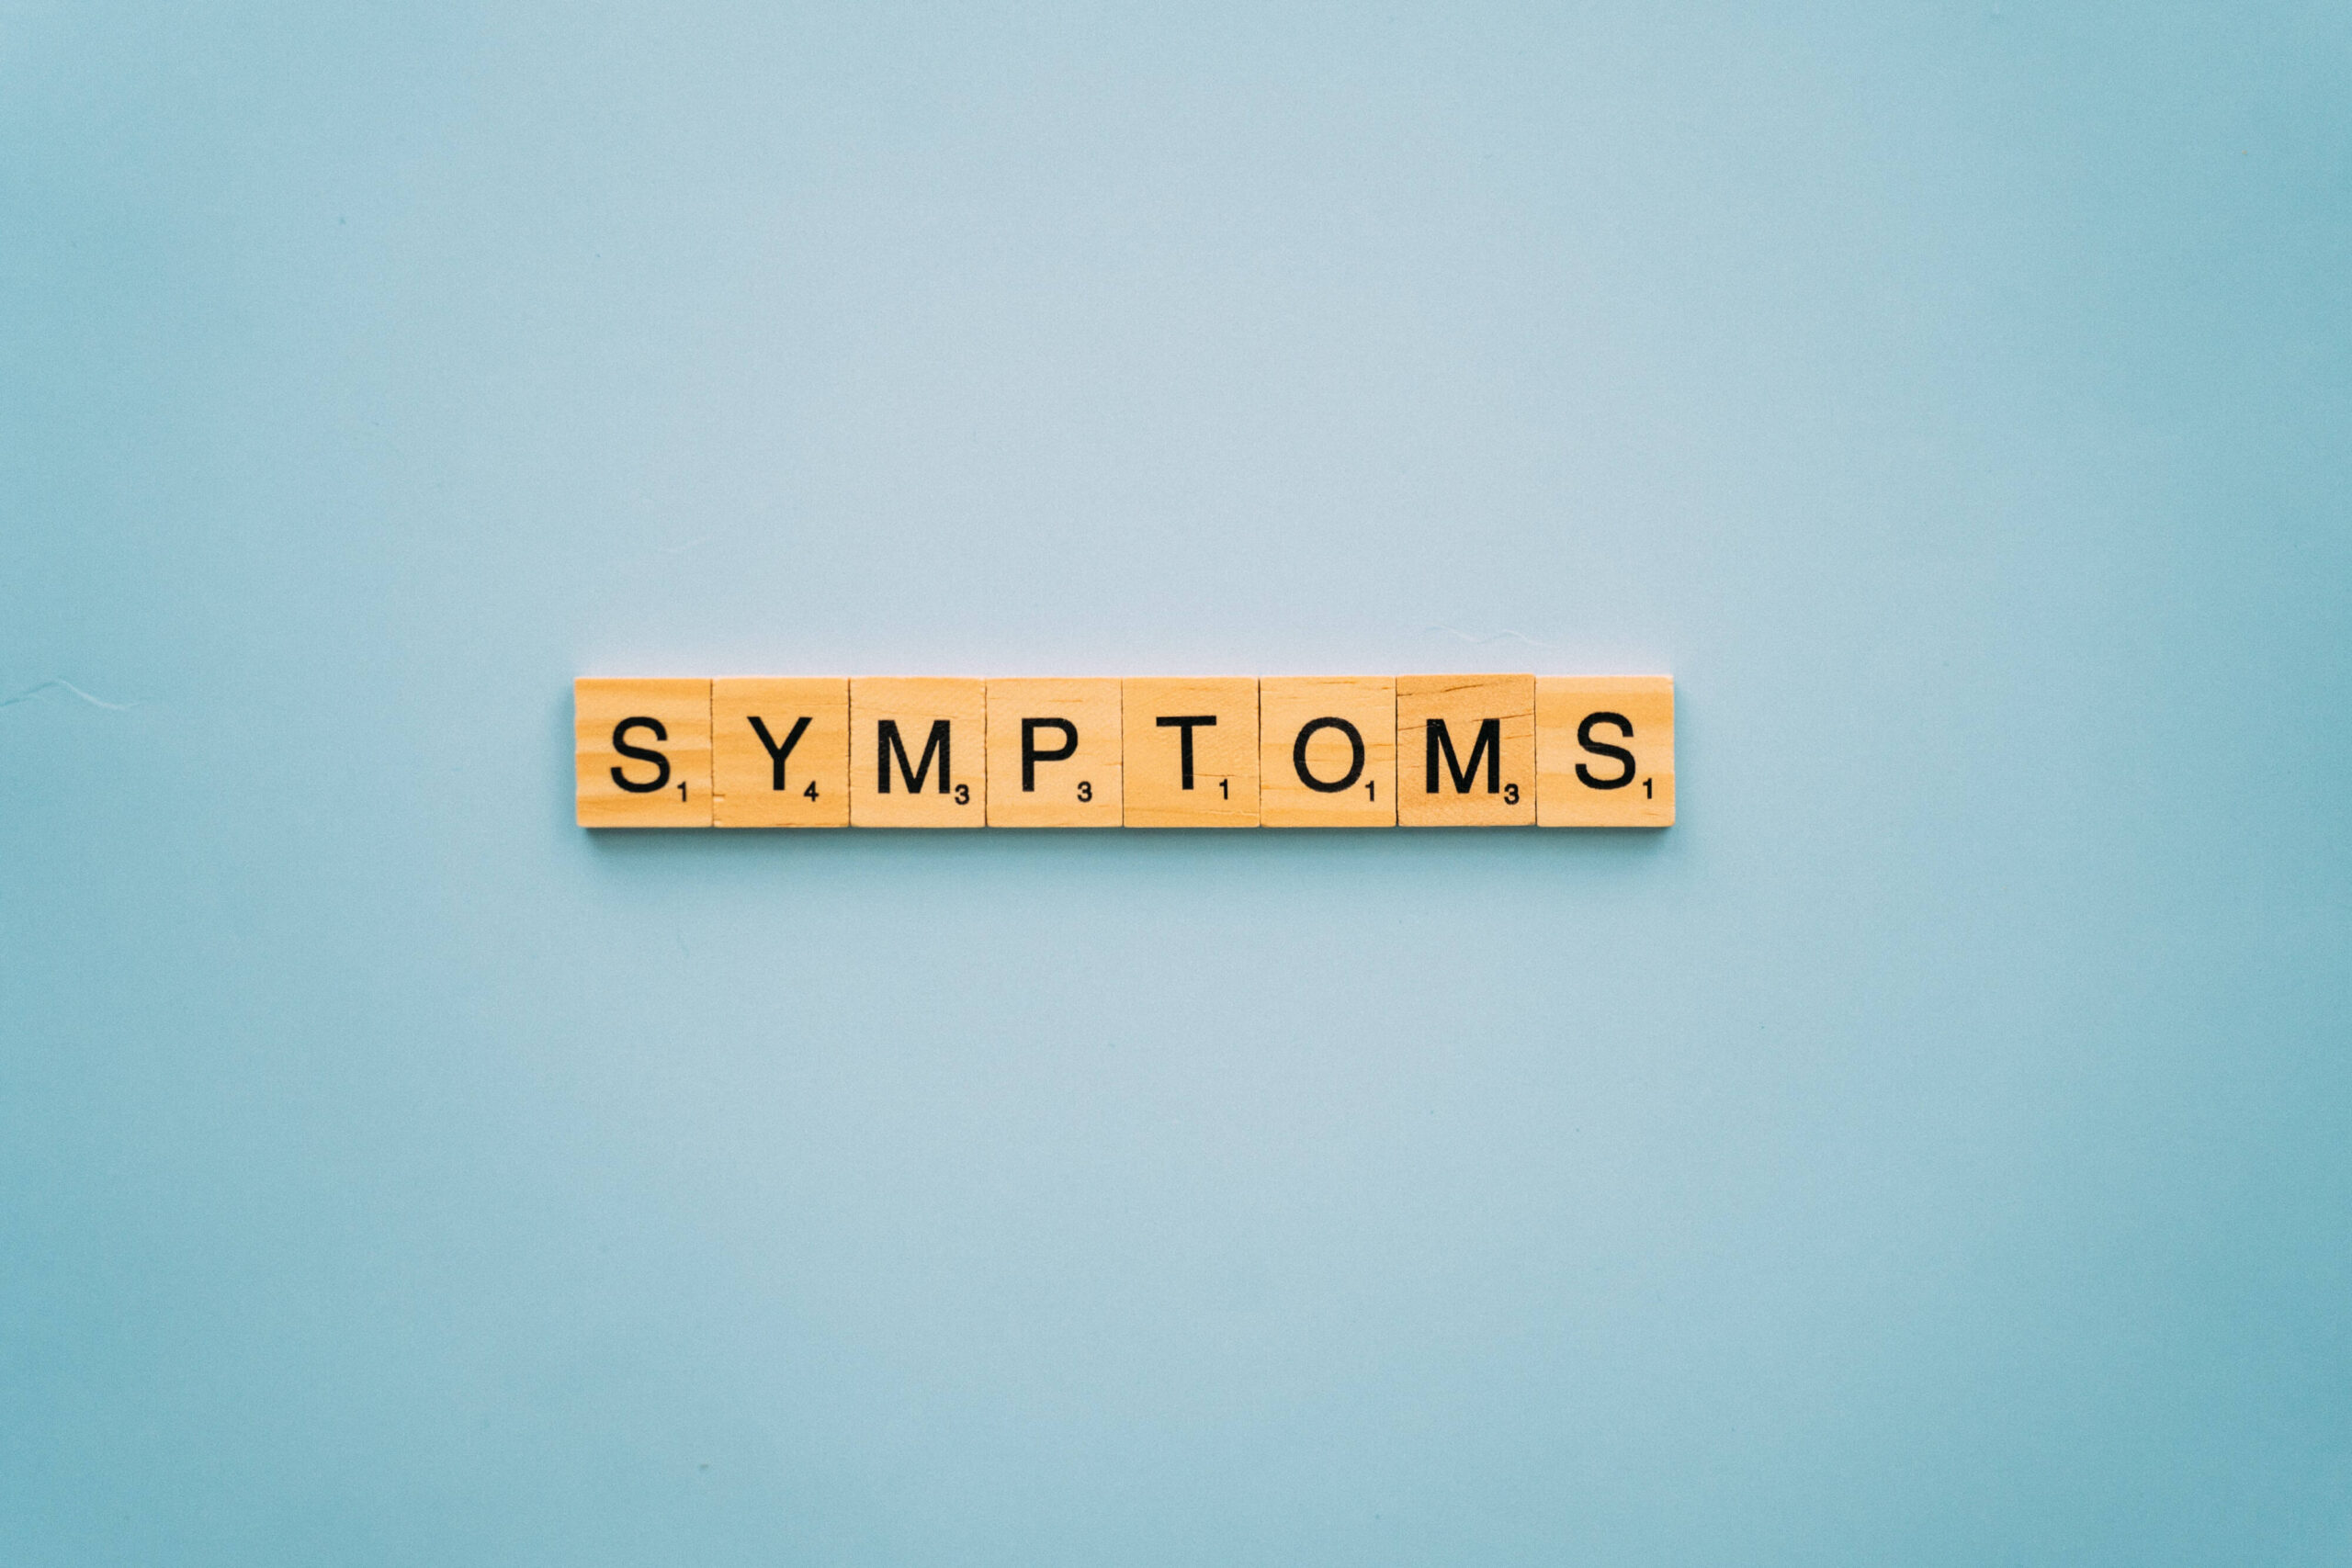 What are the symptoms of STDs?